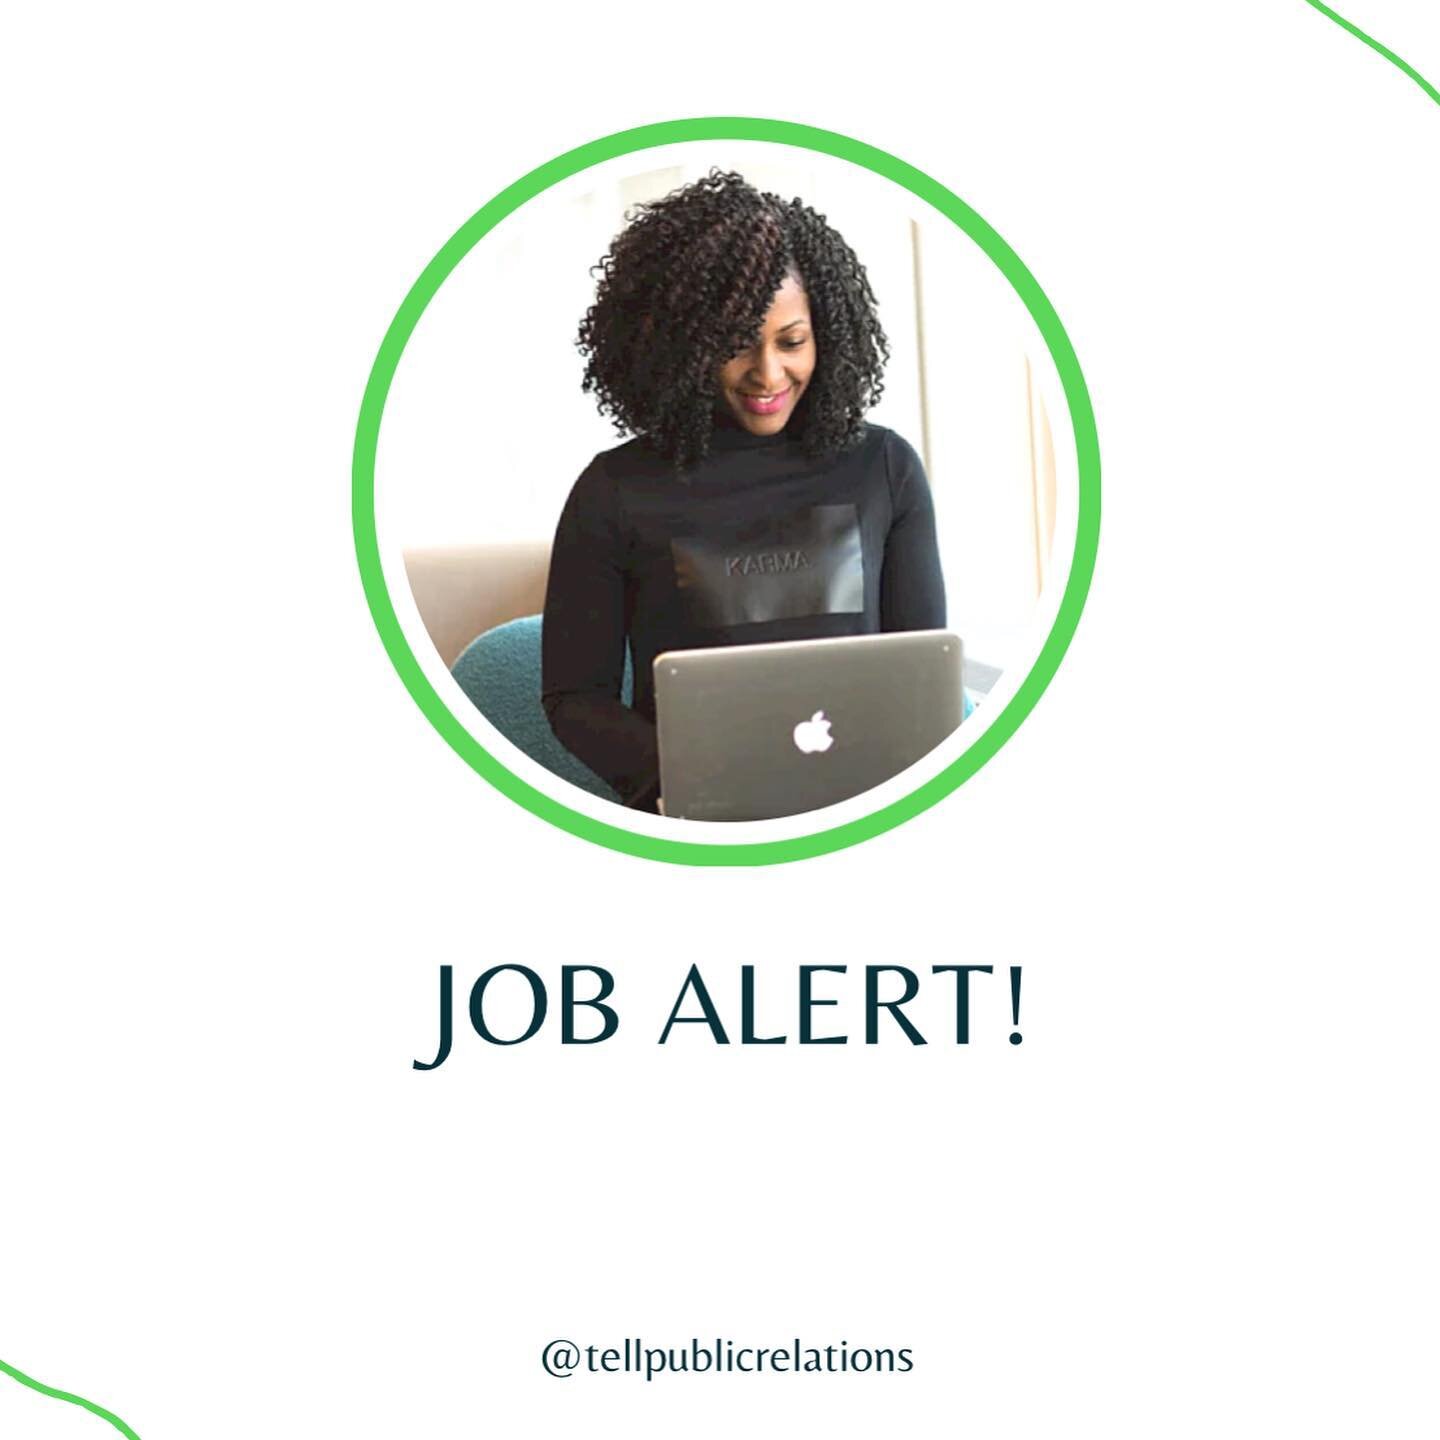 DETAILS IN THE CAPTION:

1. Public relations strategist: Contact @choicemediacommunications for details.

2. Graphic designer: Contact @consultvistra or visit Consultvistra.com/careers

3. VP of Marketing: Contact @consultvistra or visit Consultvistr